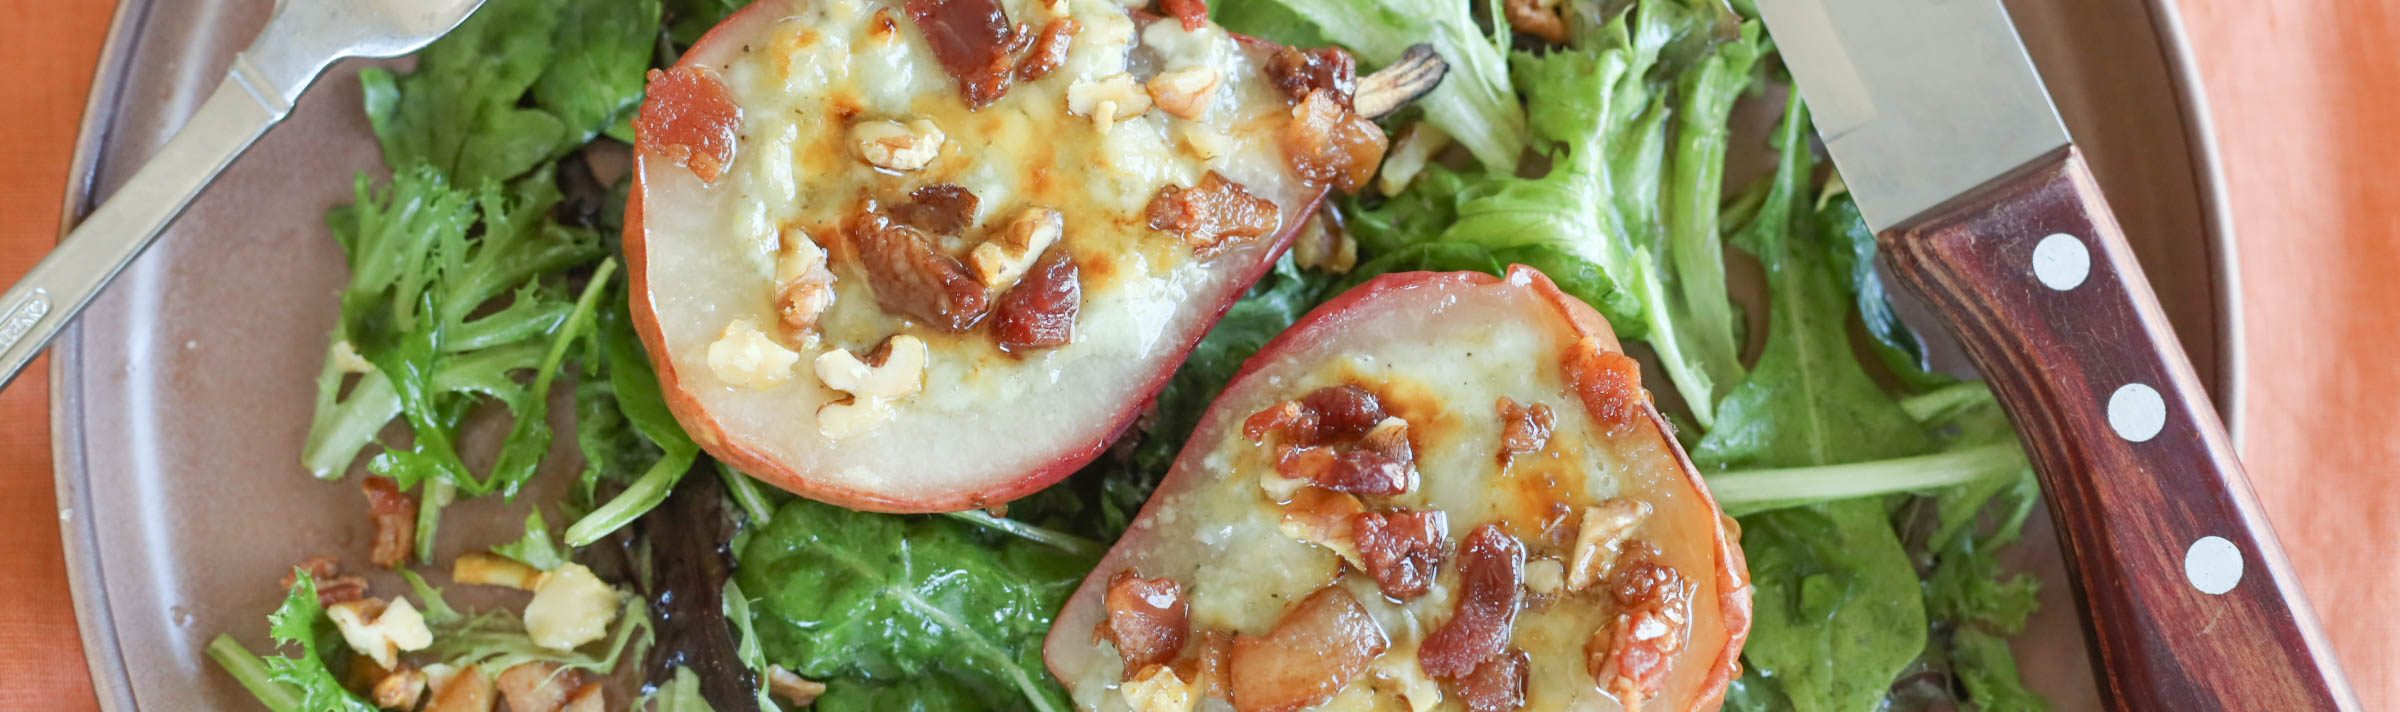 Baked Pears with Cheese, Walnuts & Honey